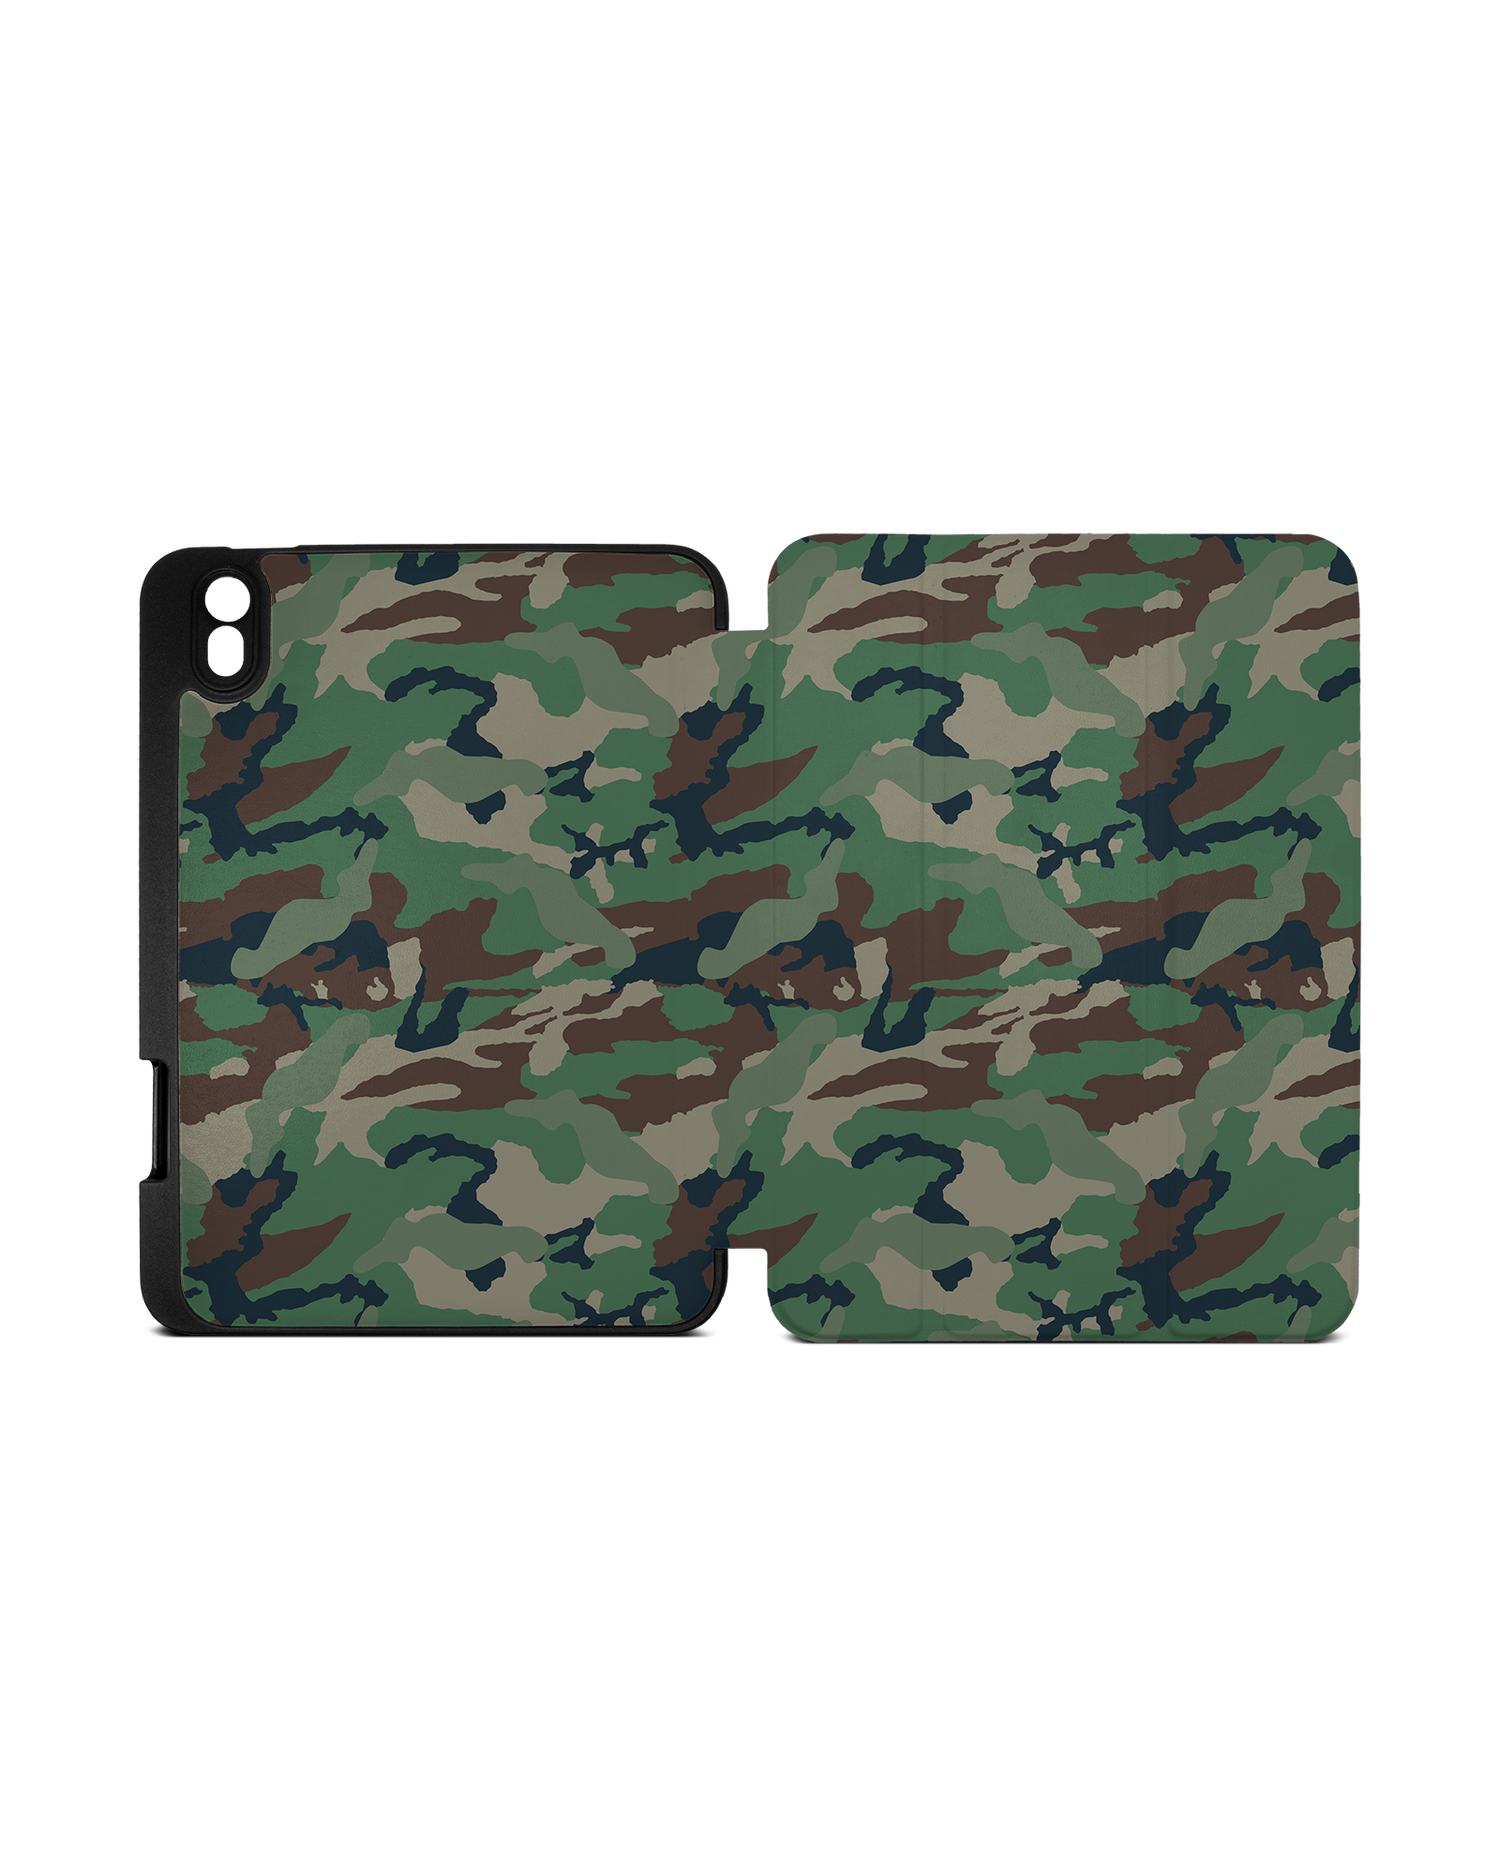 Green and Brown Camo iPad Case with Pencil Holder Apple iPad mini 6 (2021): Opened exterior view